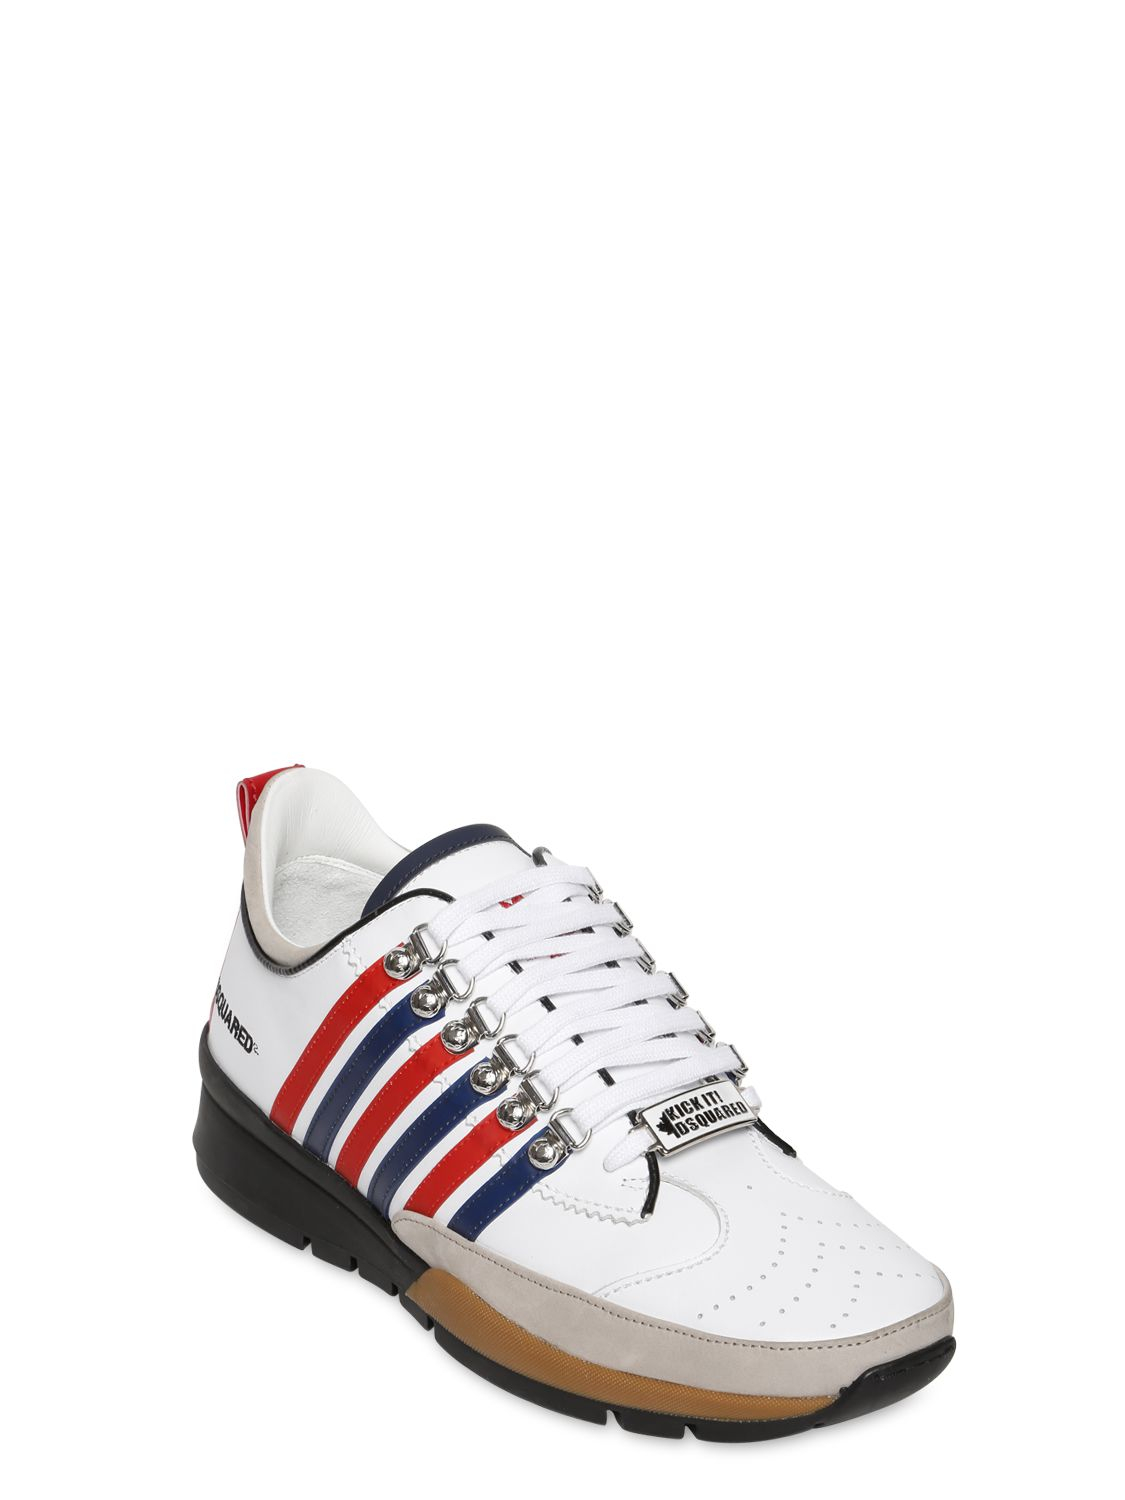 Lyst - Dsquared² Striped Leather & Suede Sneakers in White for Men